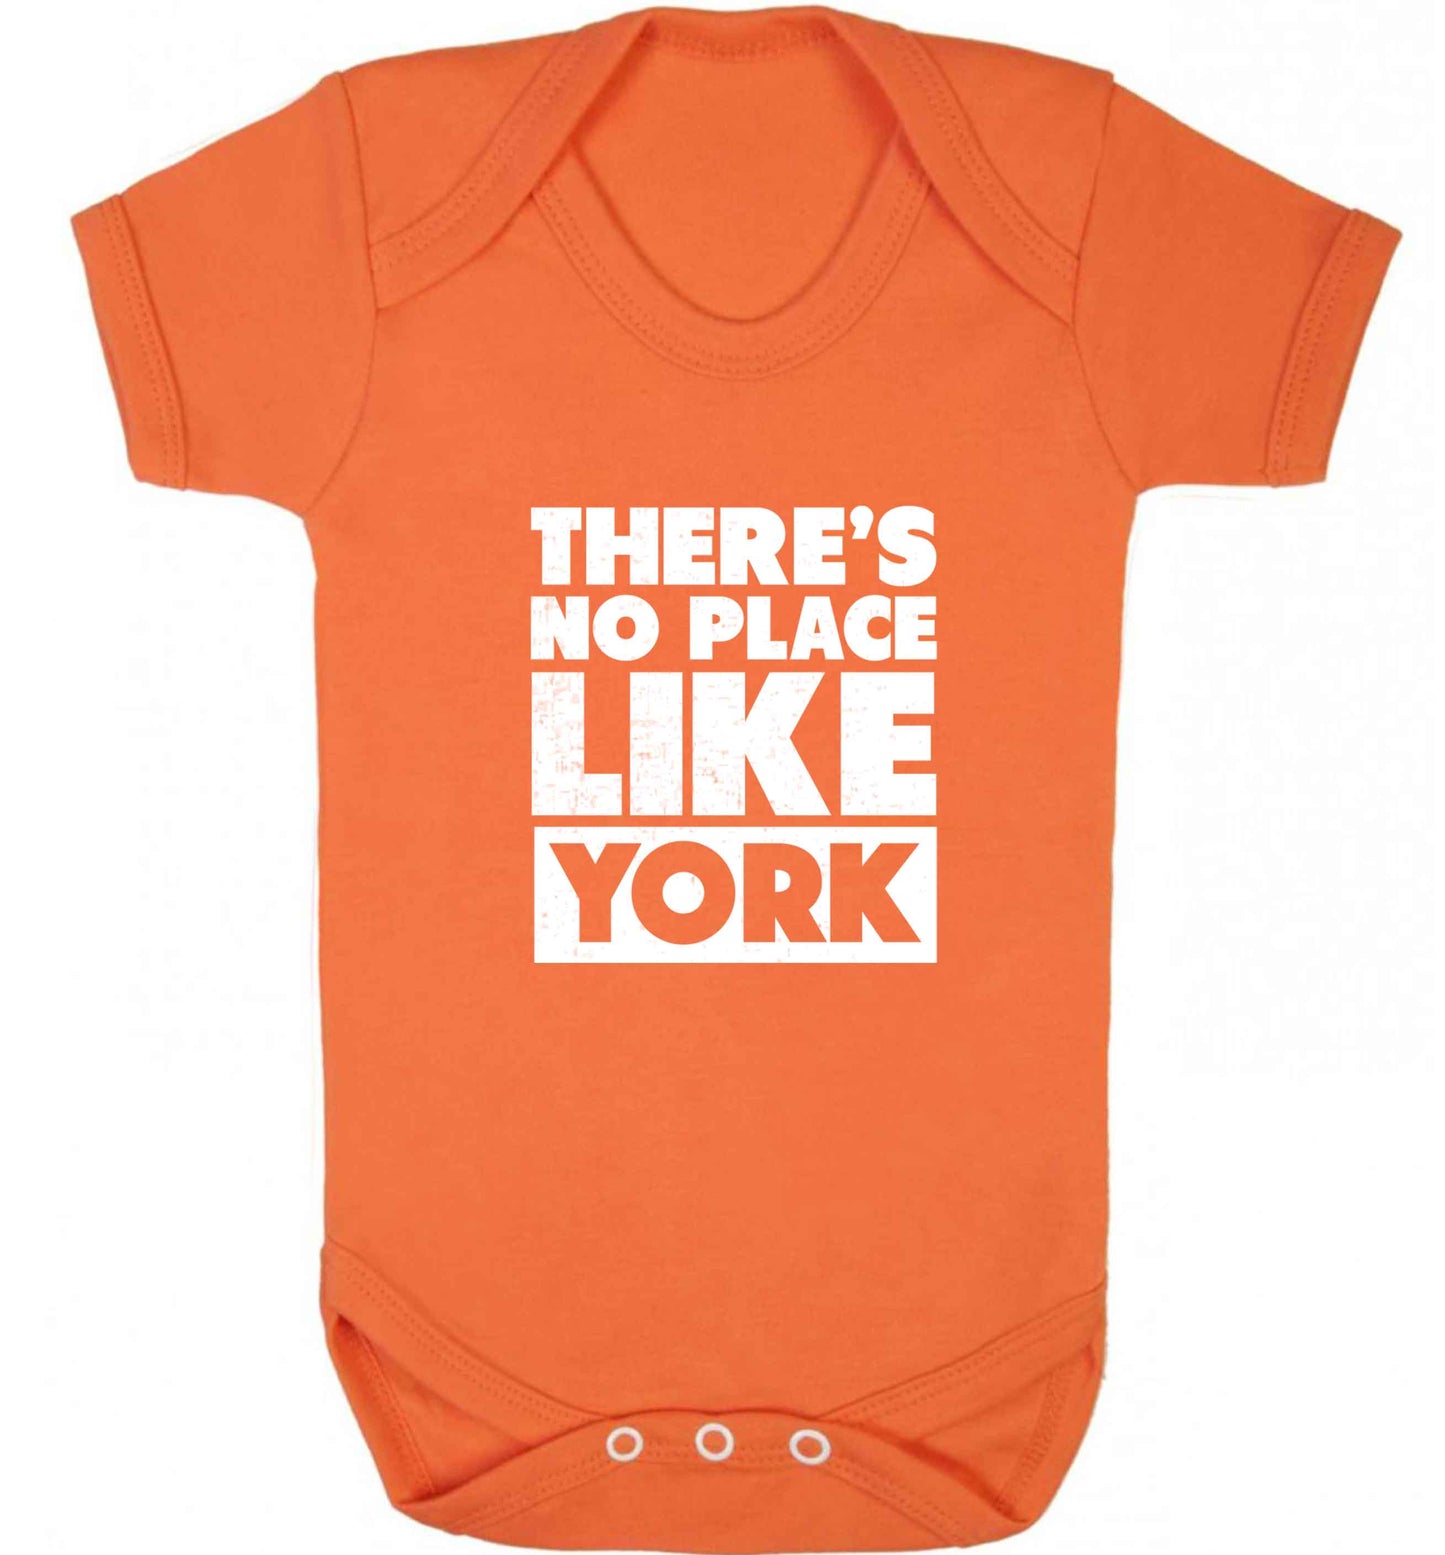 There's no place like york baby vest orange 18-24 months